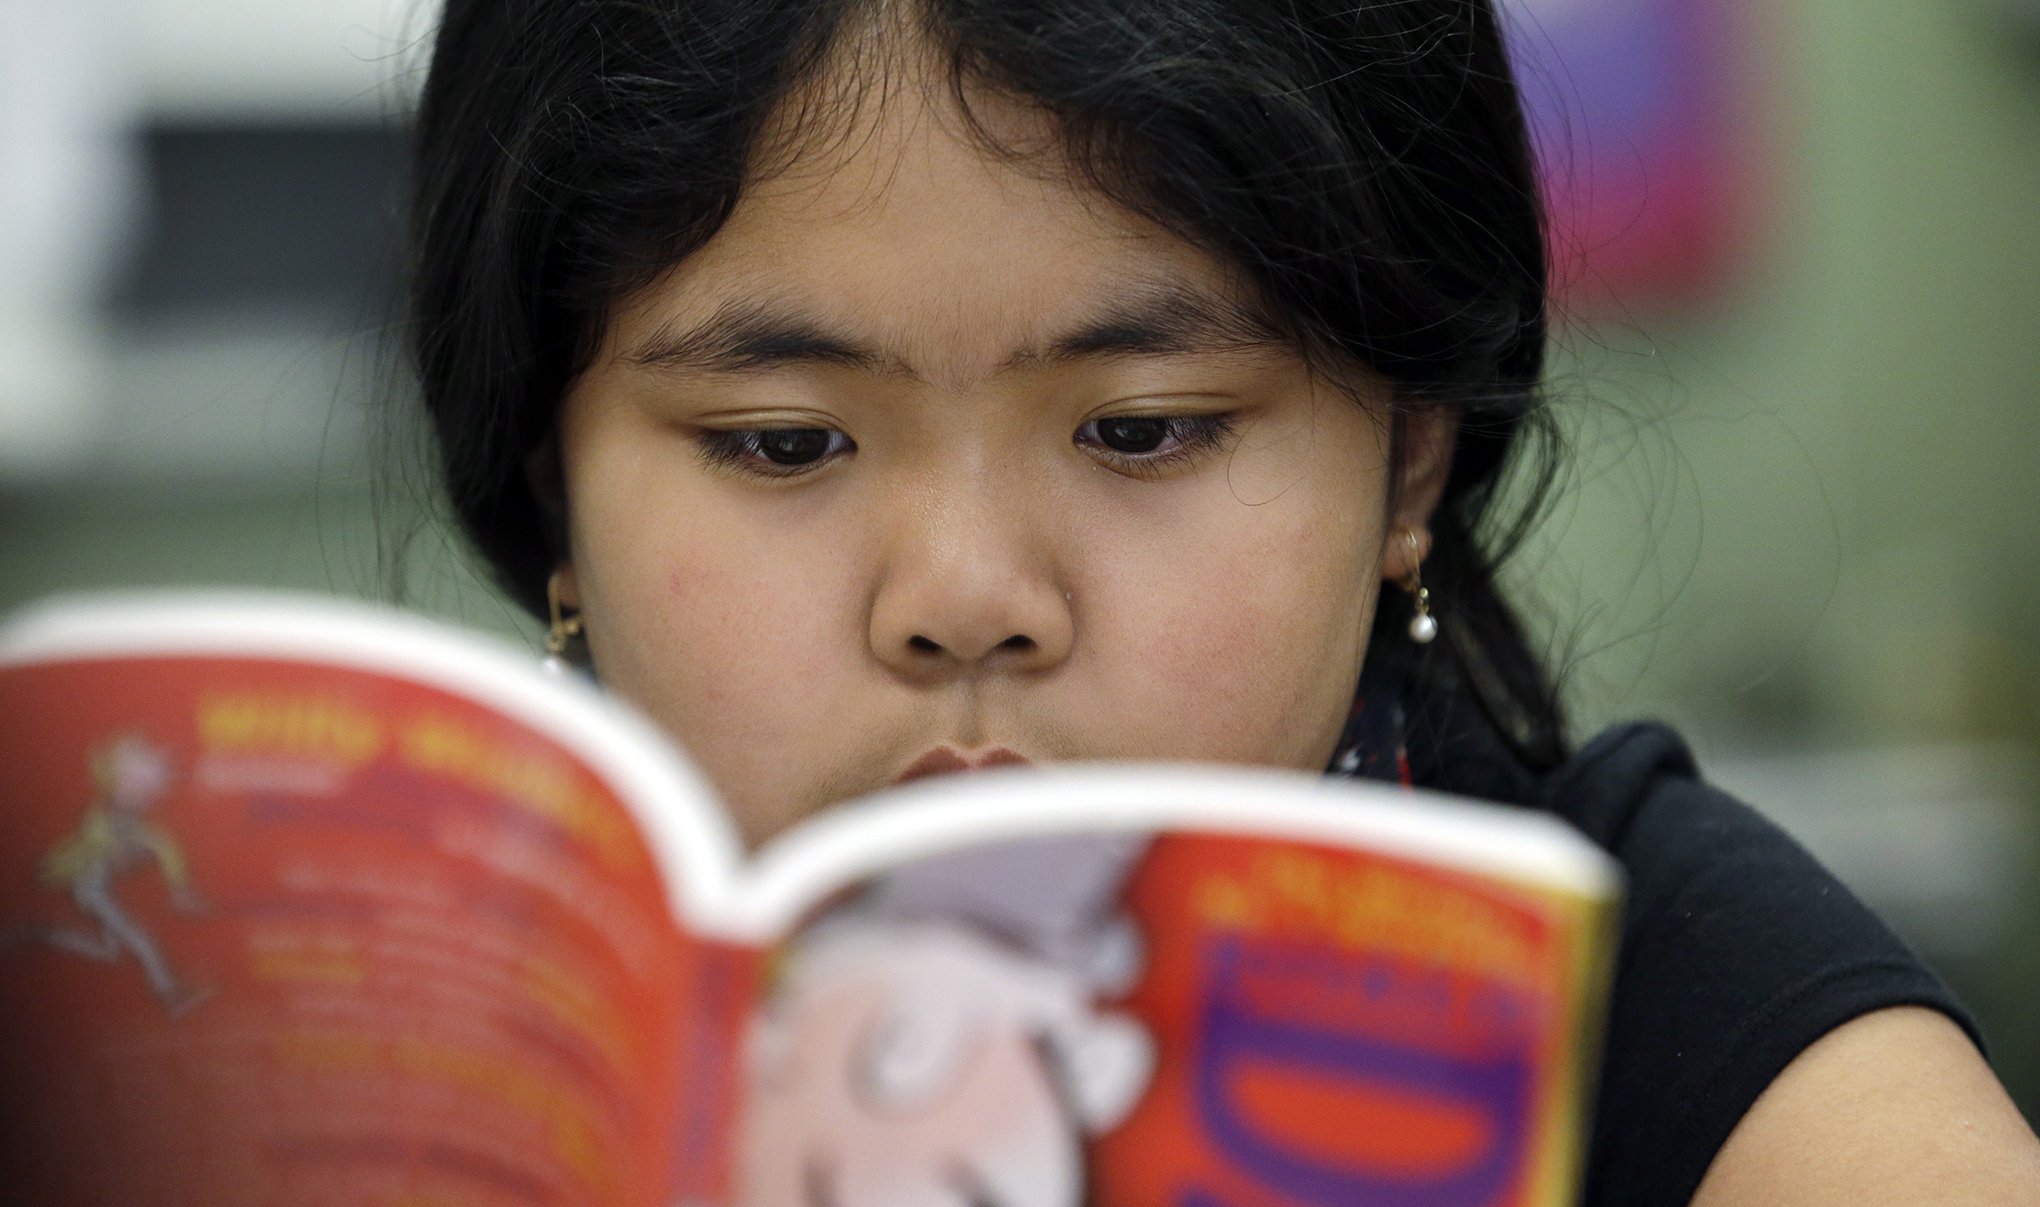 Wisconsin reading law could be adjusted to address bilingual learners